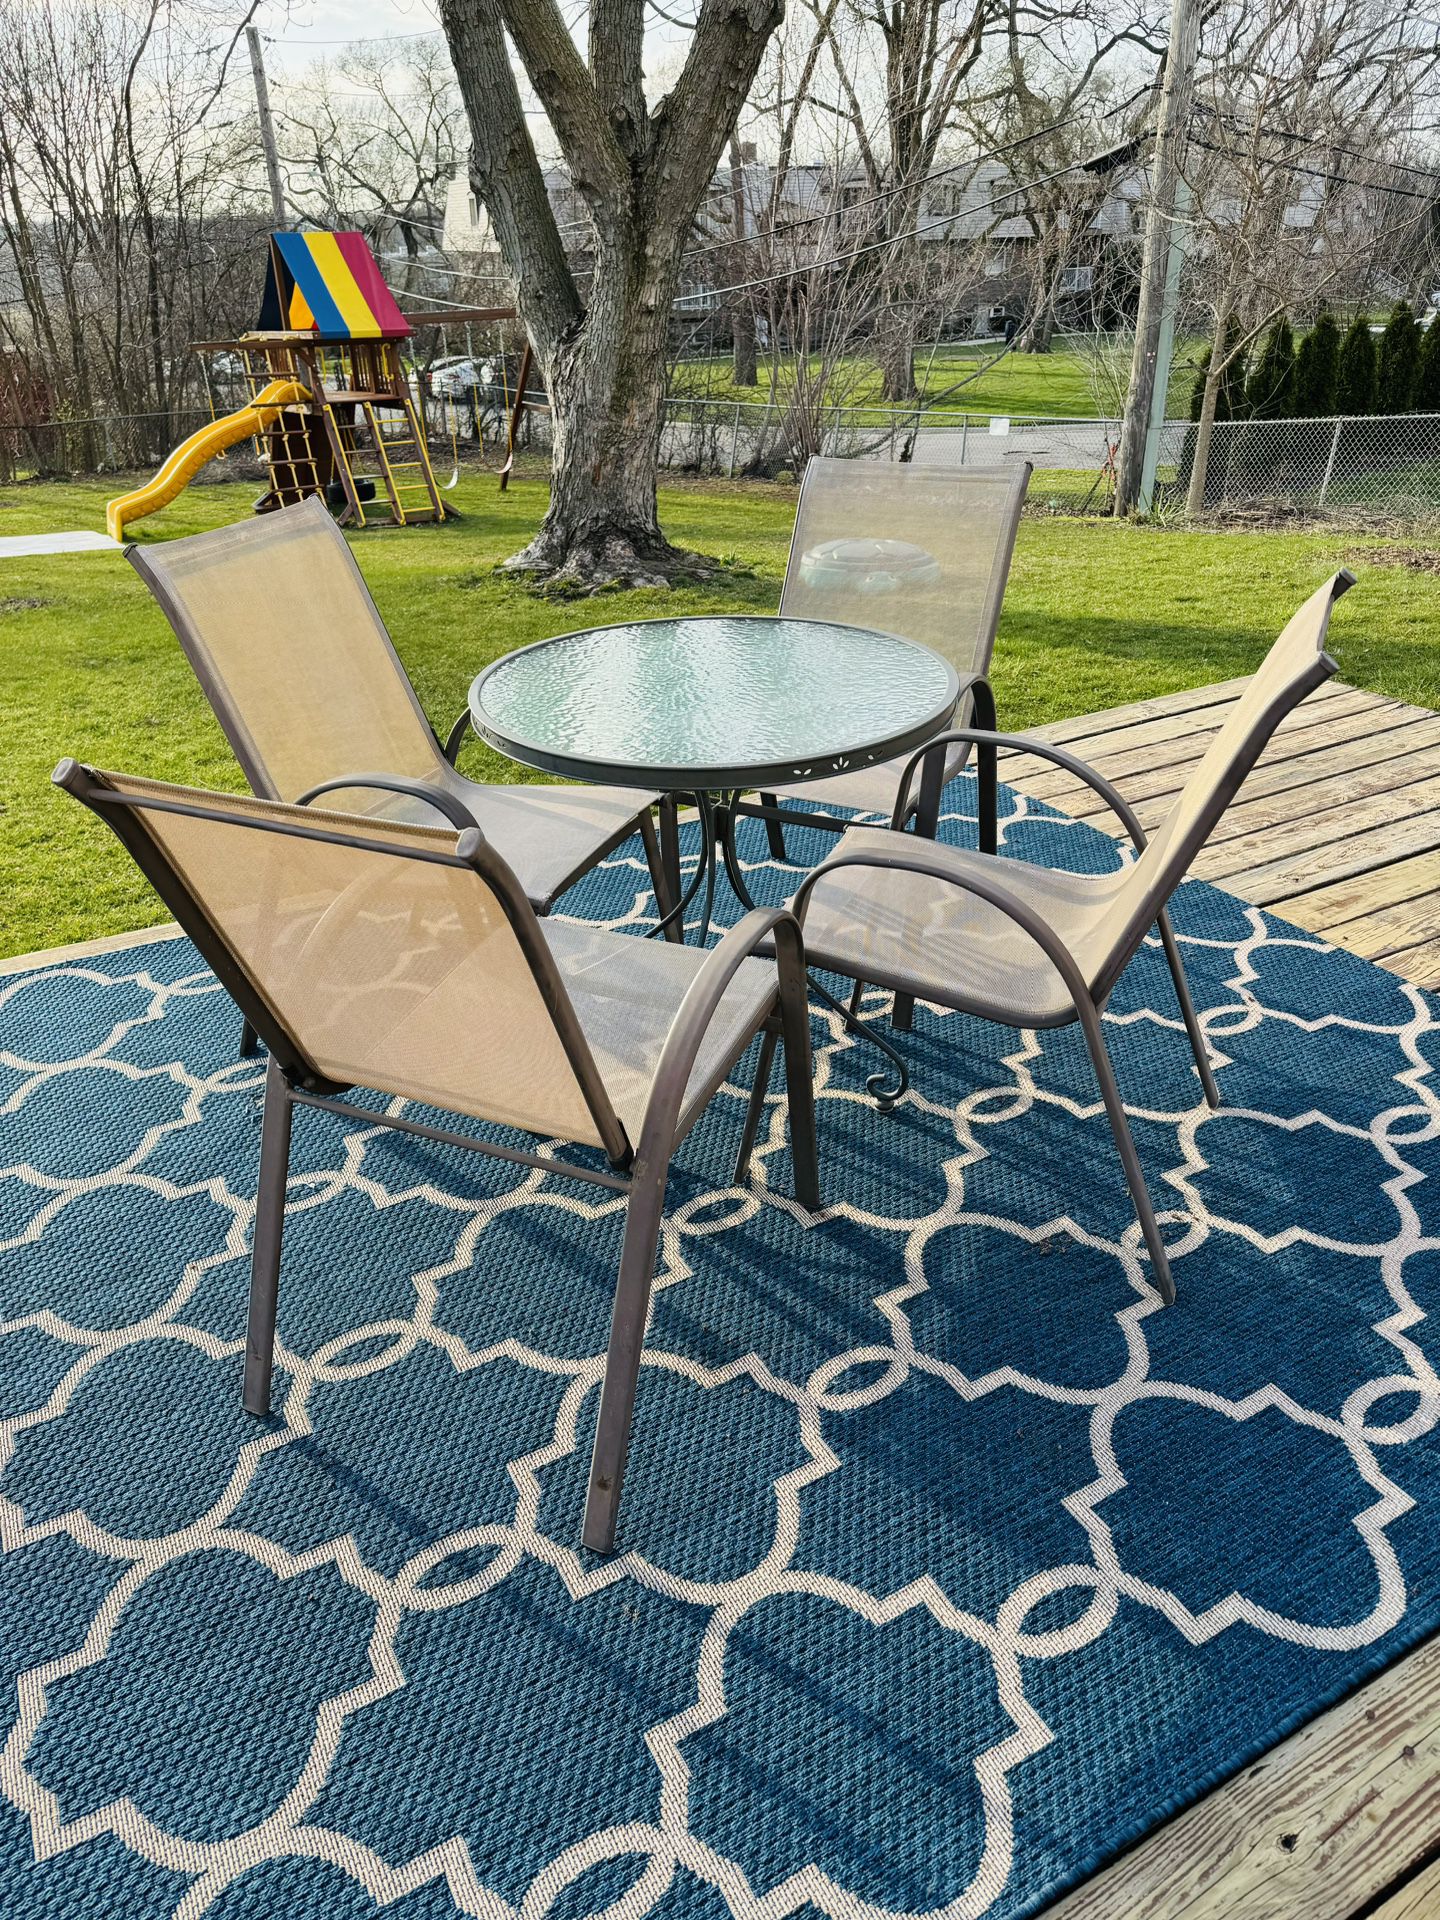 Patio Set - Patio Furniture - Outdoors - Table - Round - Chairs - Bistro